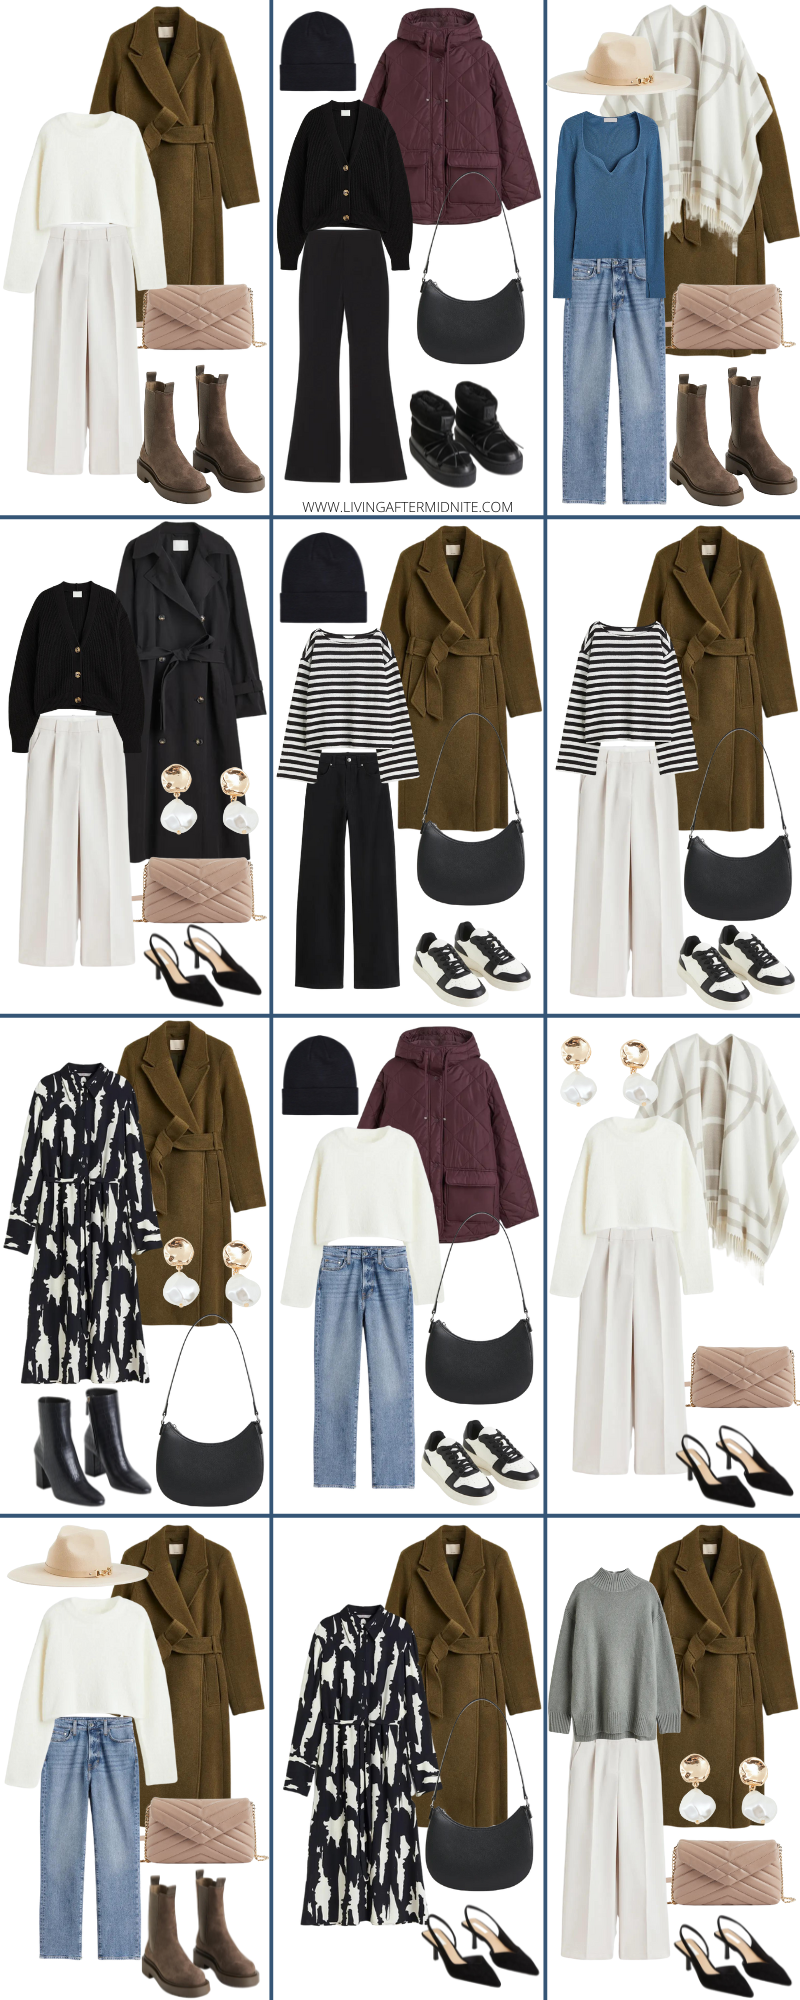 Affordable H&M Winter Capsule Wardrobe Items outfit ideas